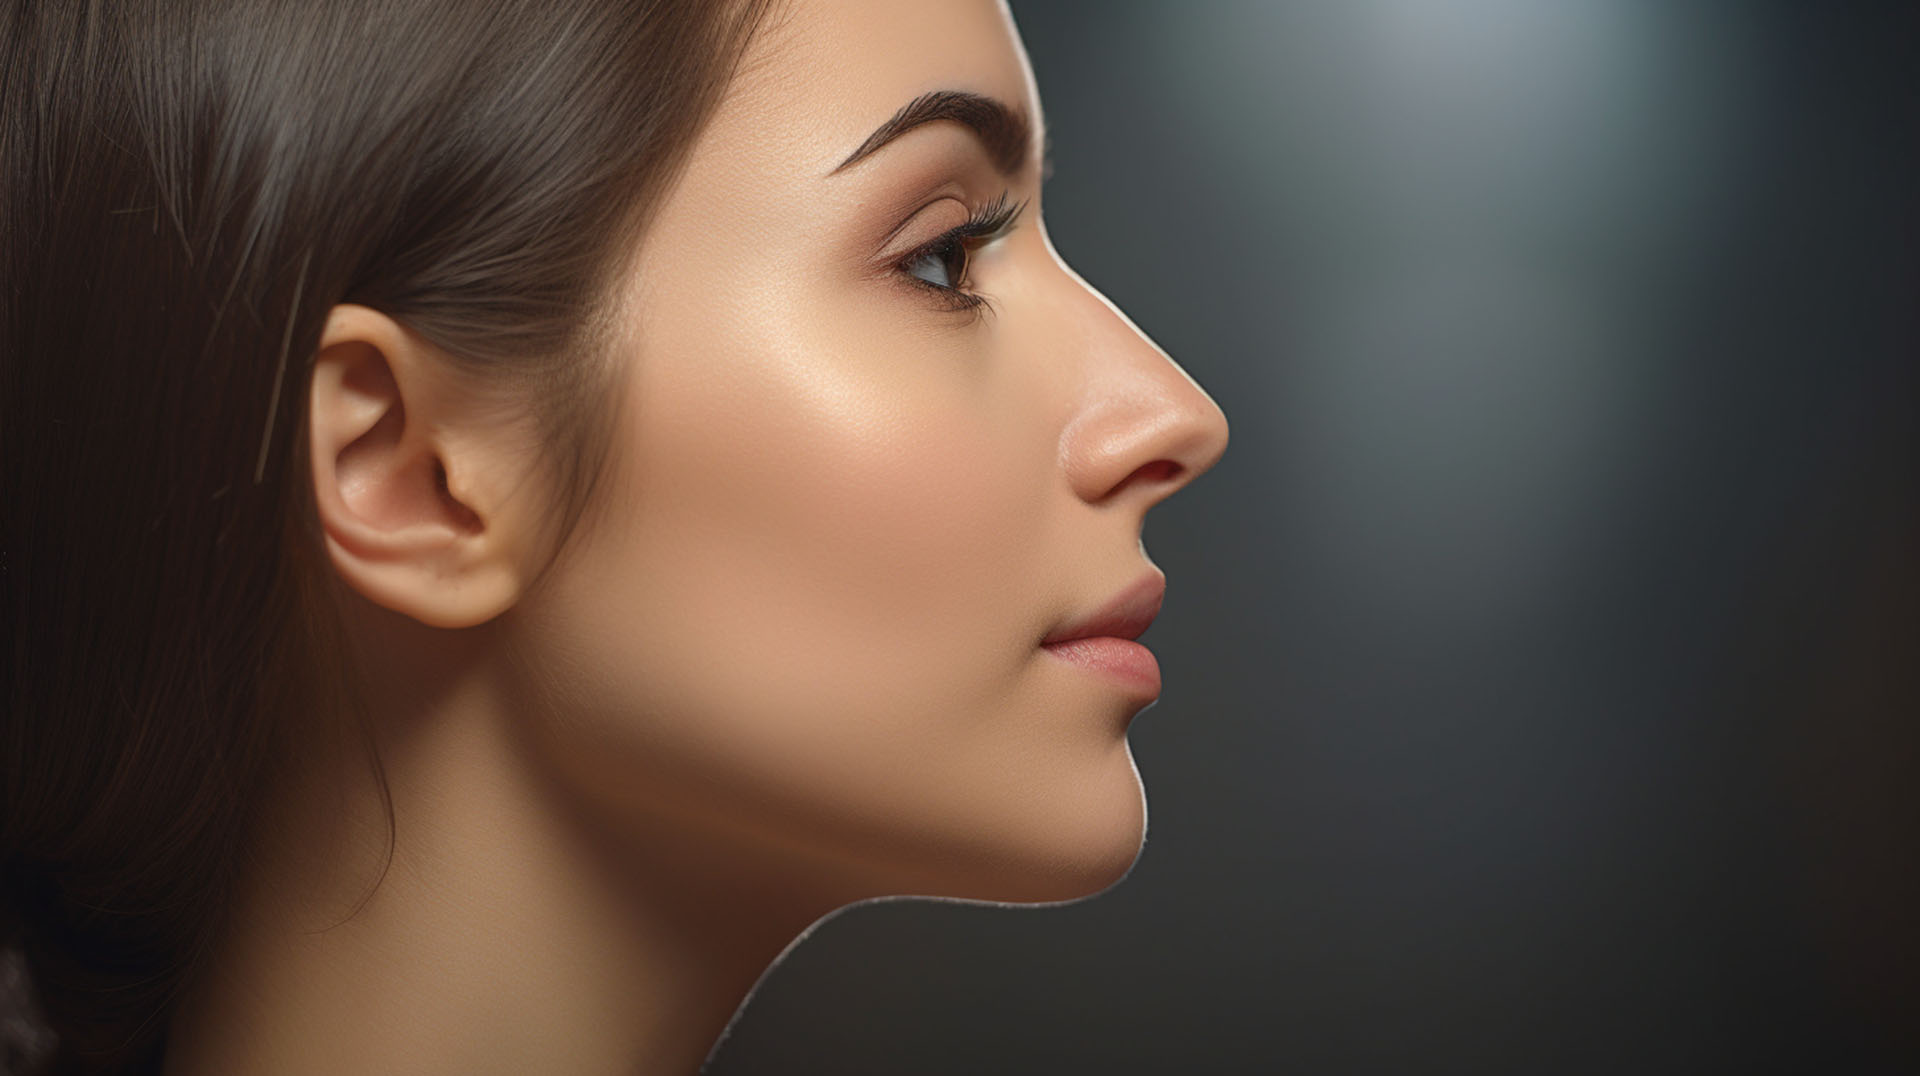 Nose Surgery in St. Thomas, ON